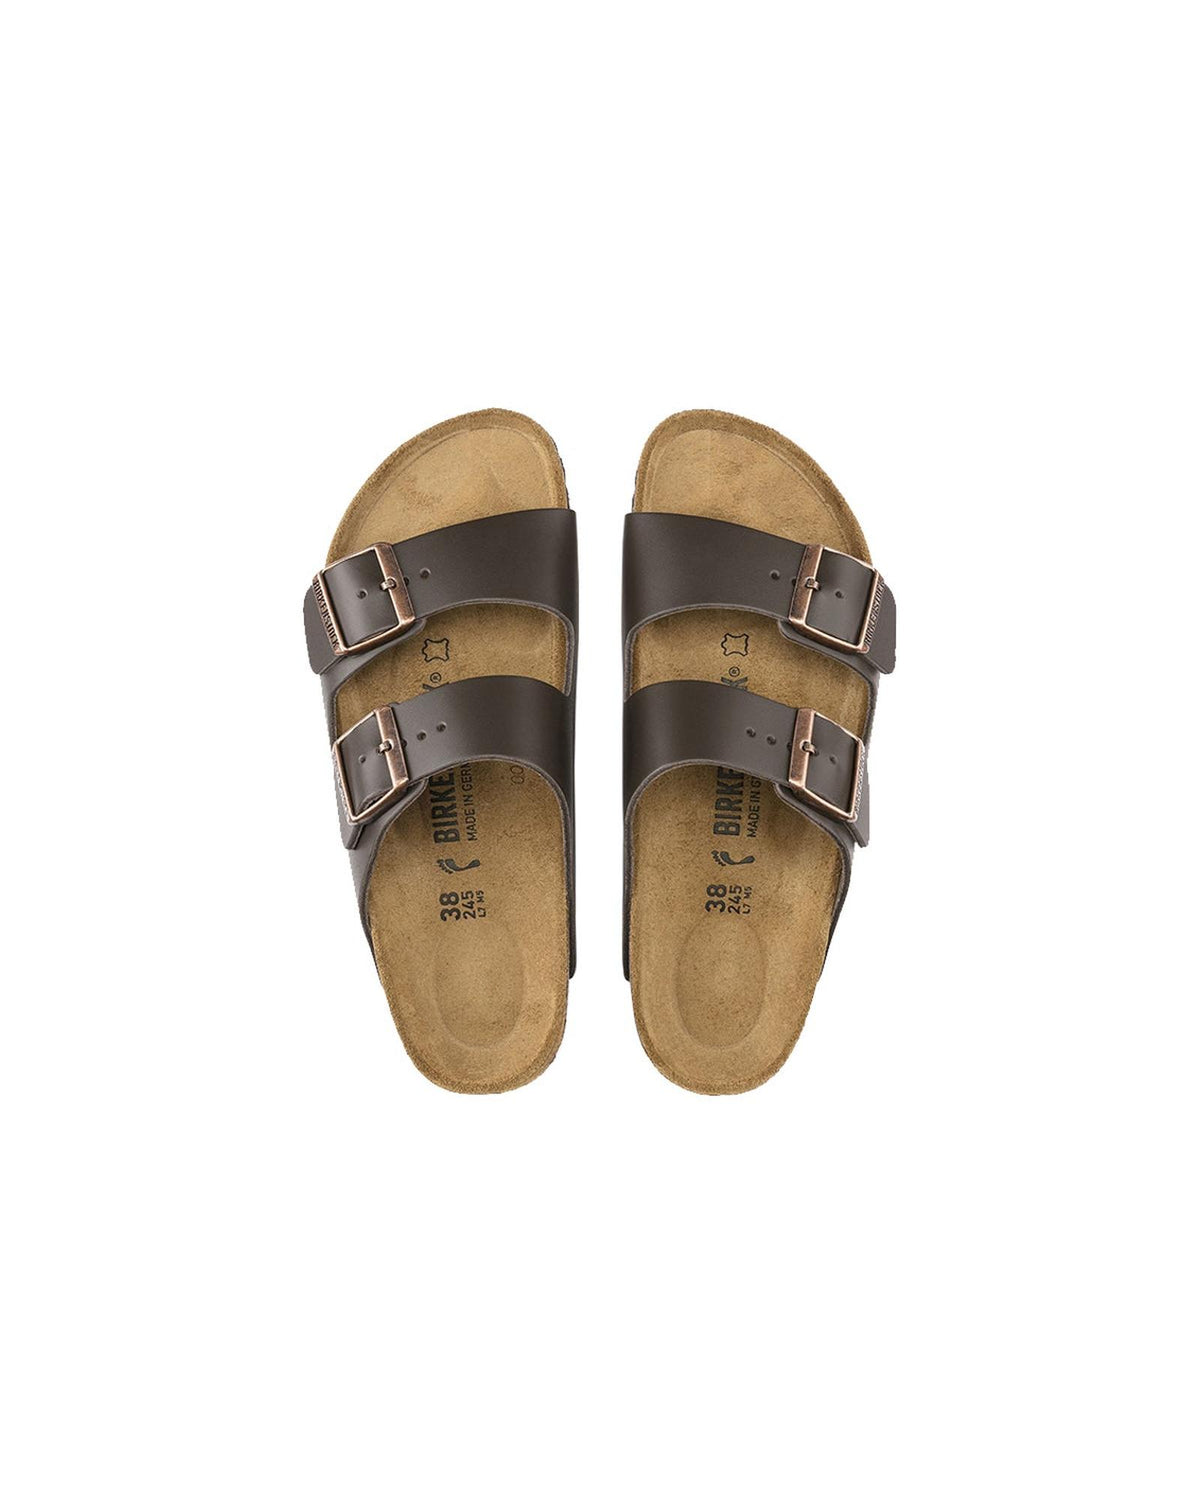 Natural Leather Regular Fit Sandal with Buckle Closure - 36 EU